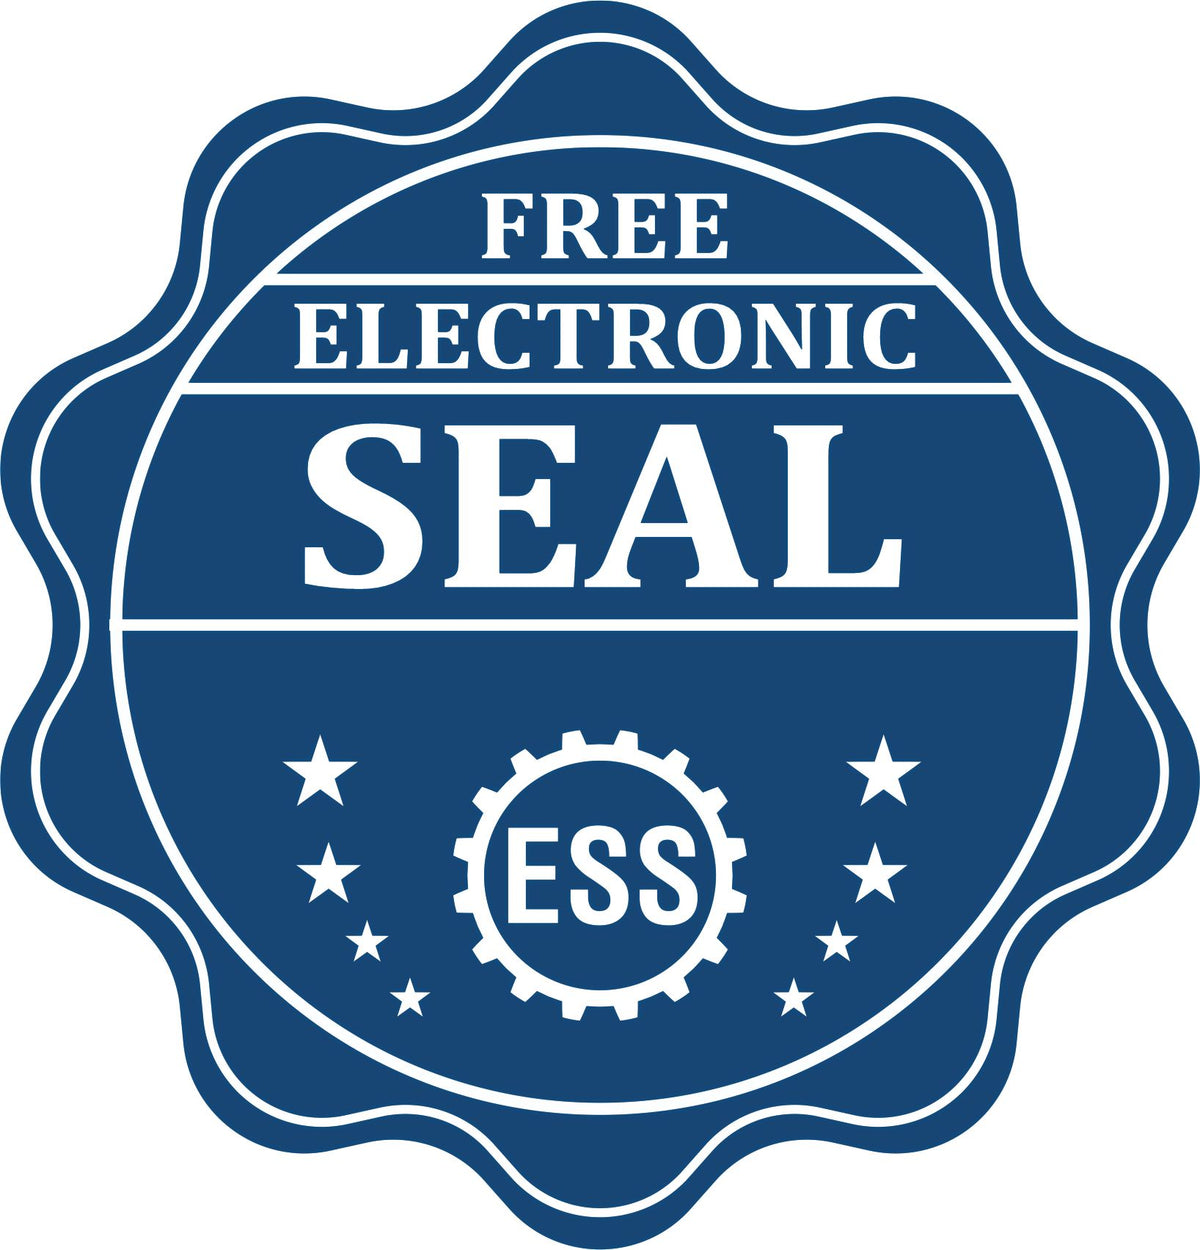 A badge showing a free electronic seal for the Hybrid Iowa Architect Seal with stars and the ESS gear on the emblem.